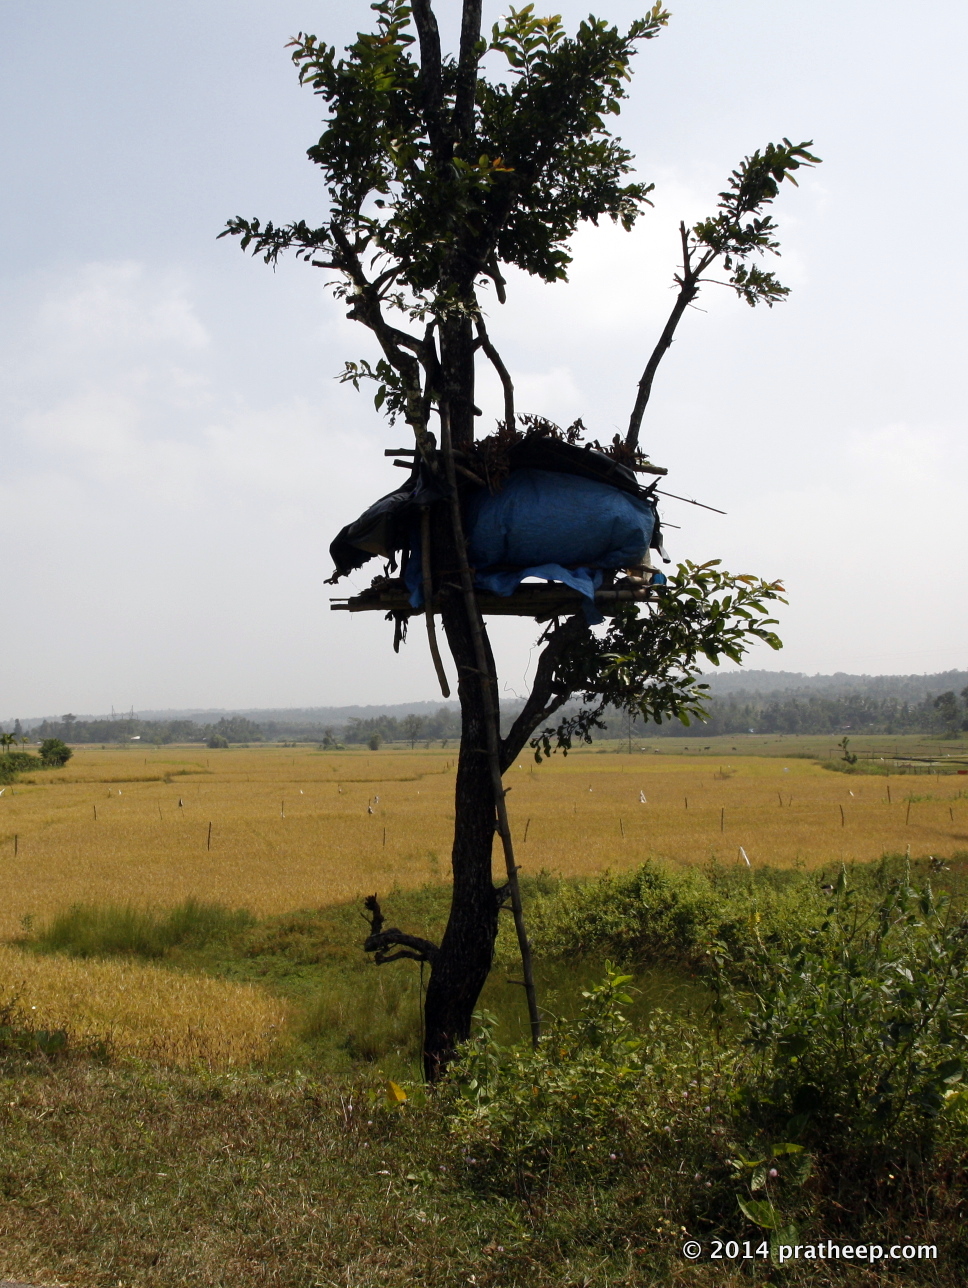 You can see many such watch posts setup on trees. This is located inside the agriculture field near the Bavali on the Kerala-Karnataka border